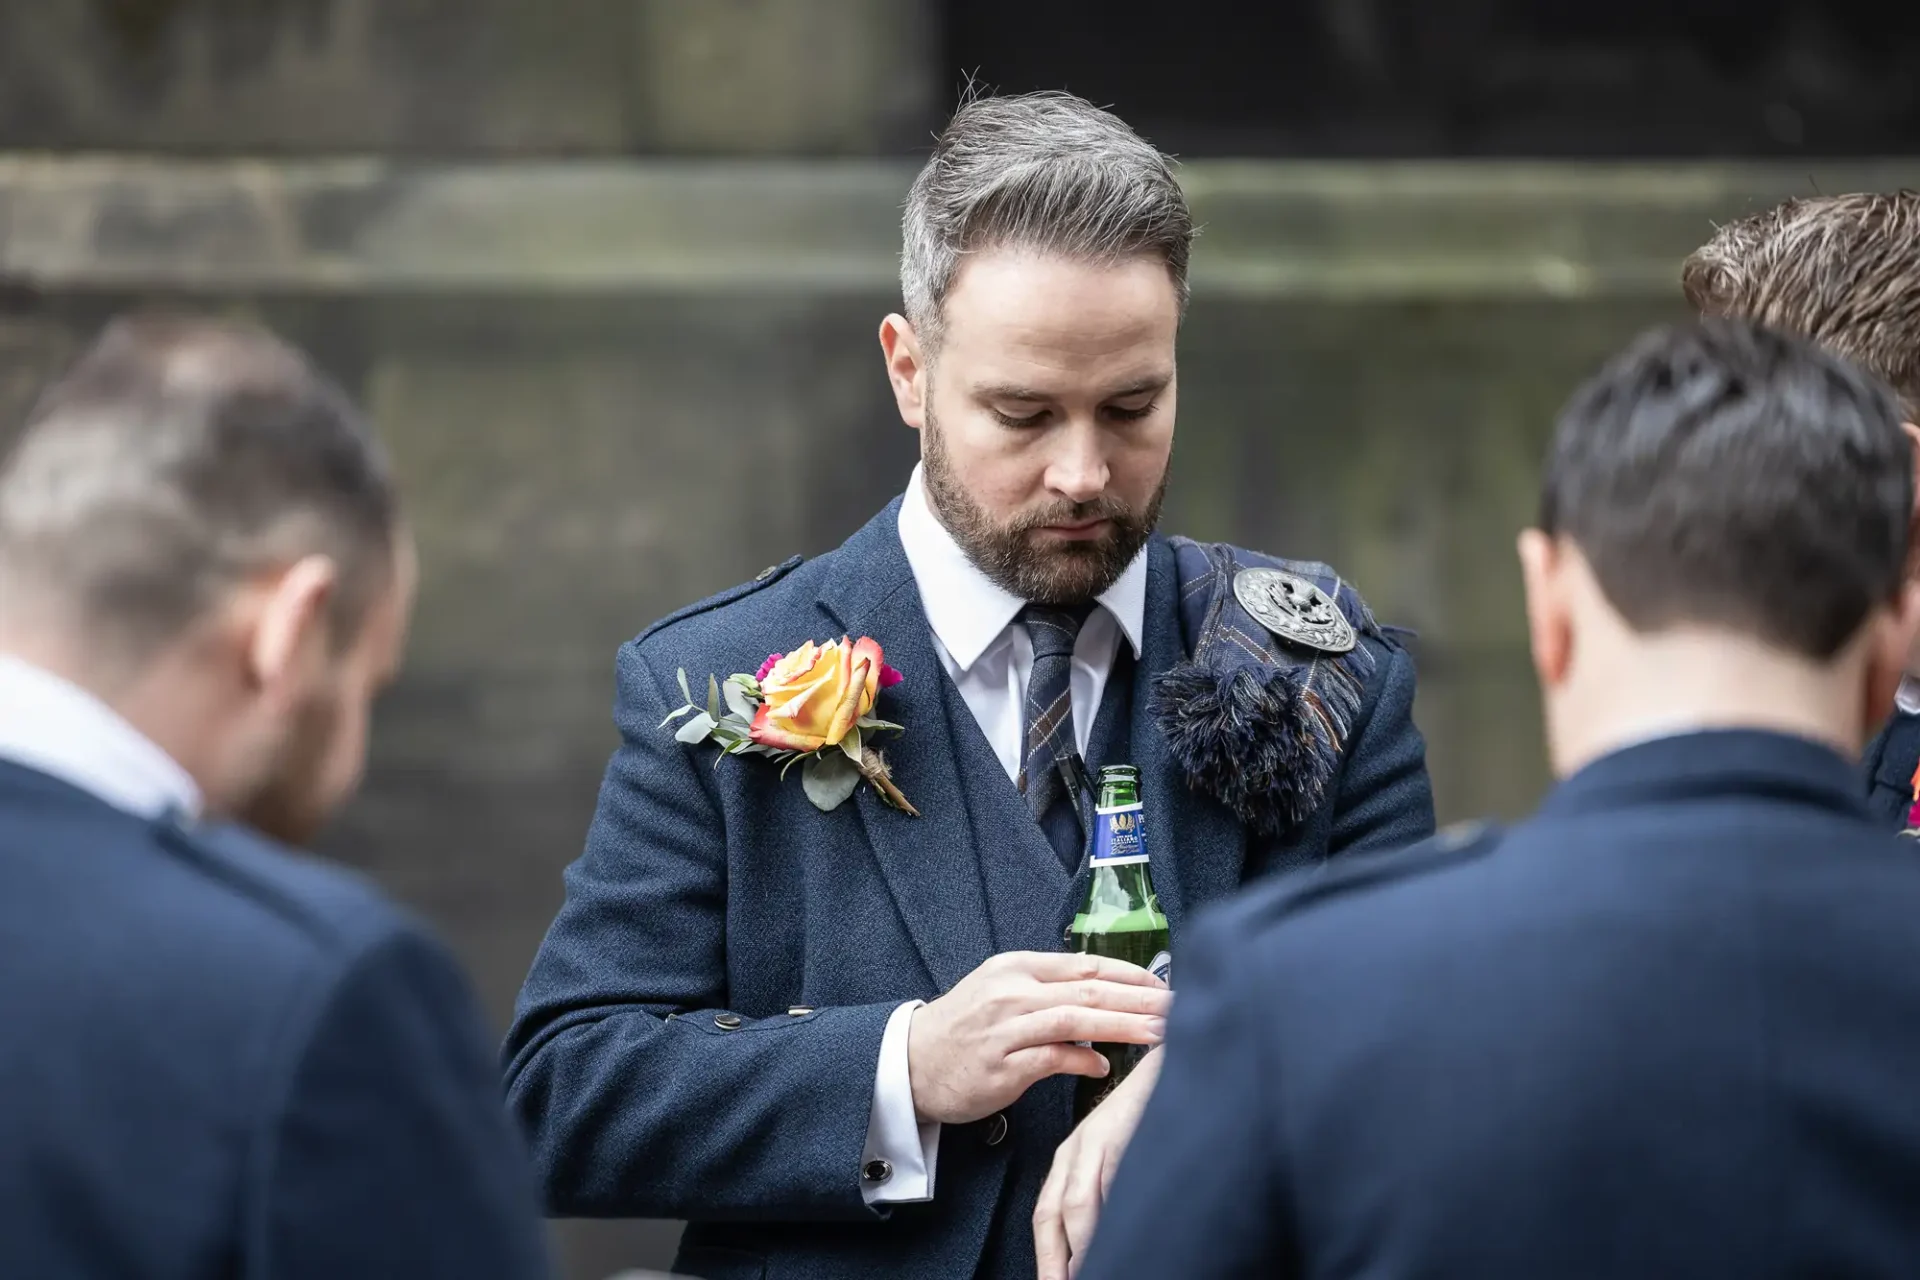 A man in a formal suit with a boutonniere checks his watch, standing among other men in a conversational outdoor setting.